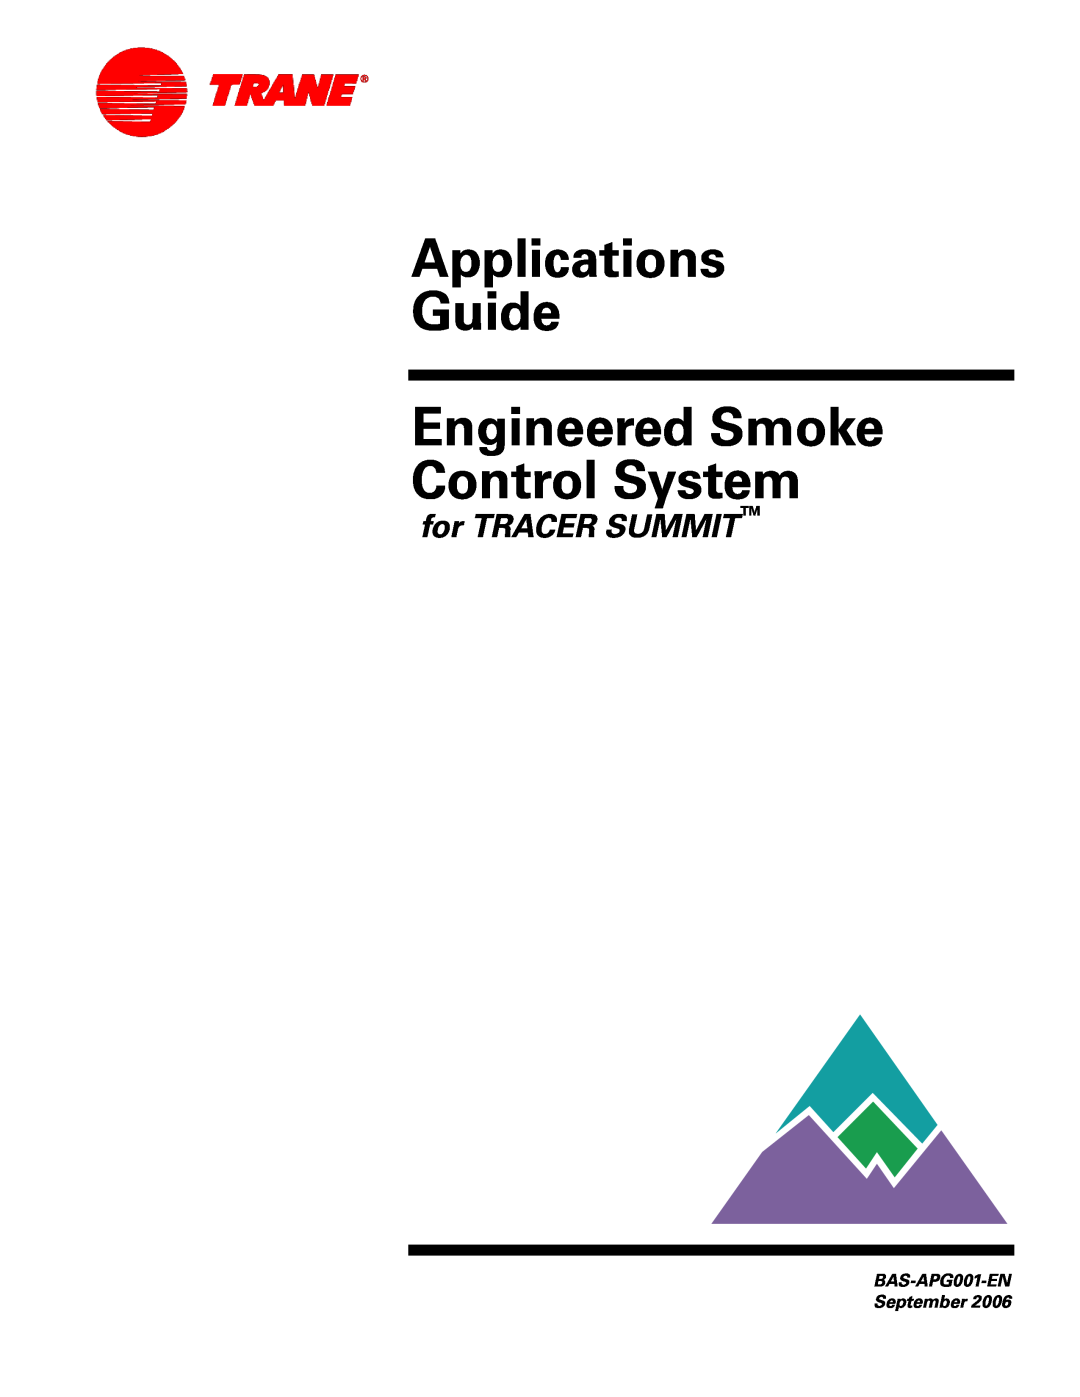 Trane Engineered Smoke Control System for Tracer Summit Applications Guide, for TRACER SUMMIT, BAS-APG001-ENSeptember 